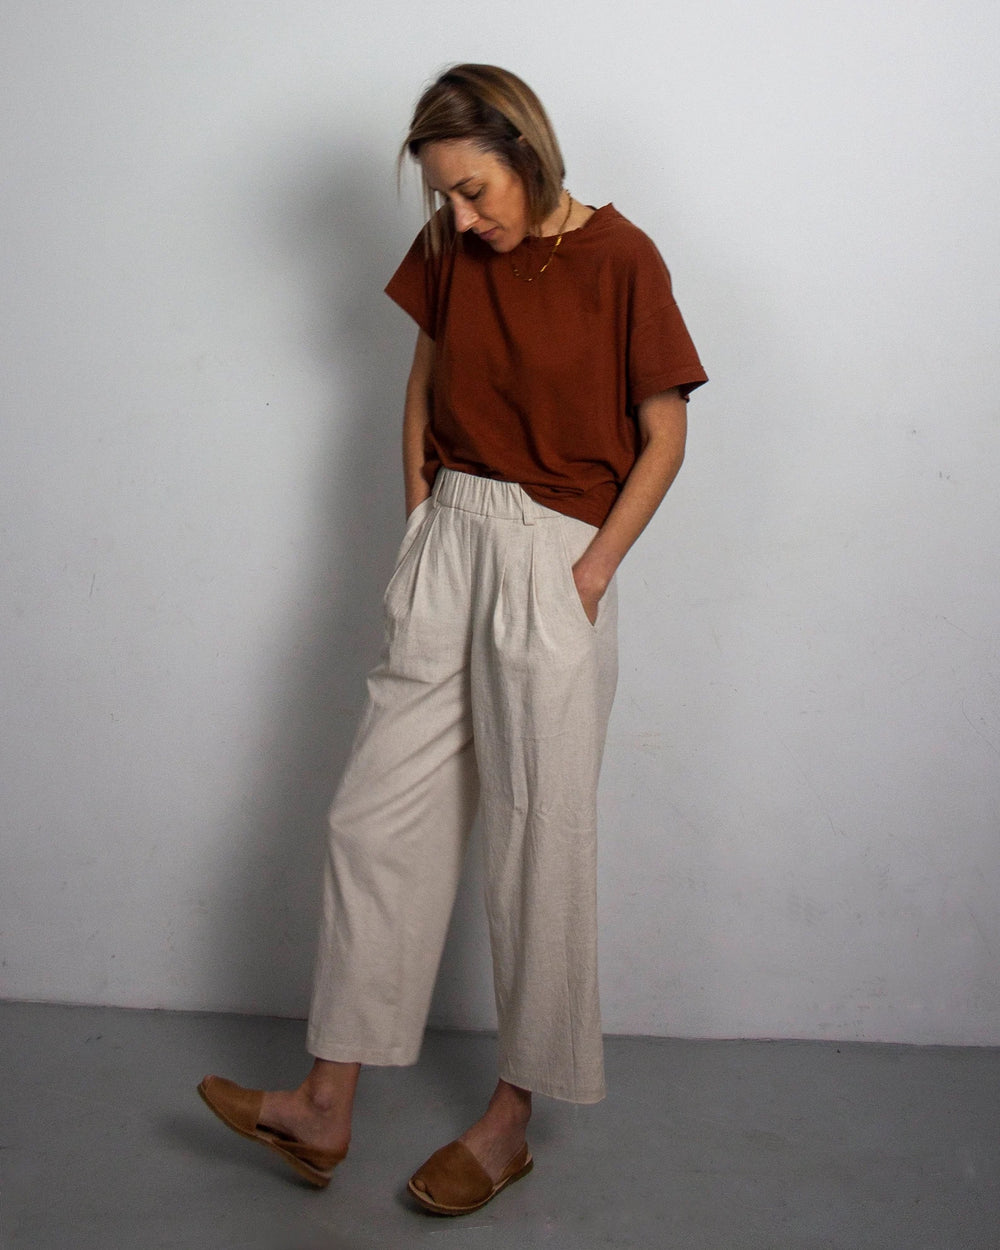 Women wearing the Xanelé Longs sewing pattern from French Navy on The Fold Line. A shorts to trousers extension pattern made in linen, hemp, tencel, wool or chambray fabrics, featuring an elastic waist, angled front pockets, relaxed fit, slightly cropped 